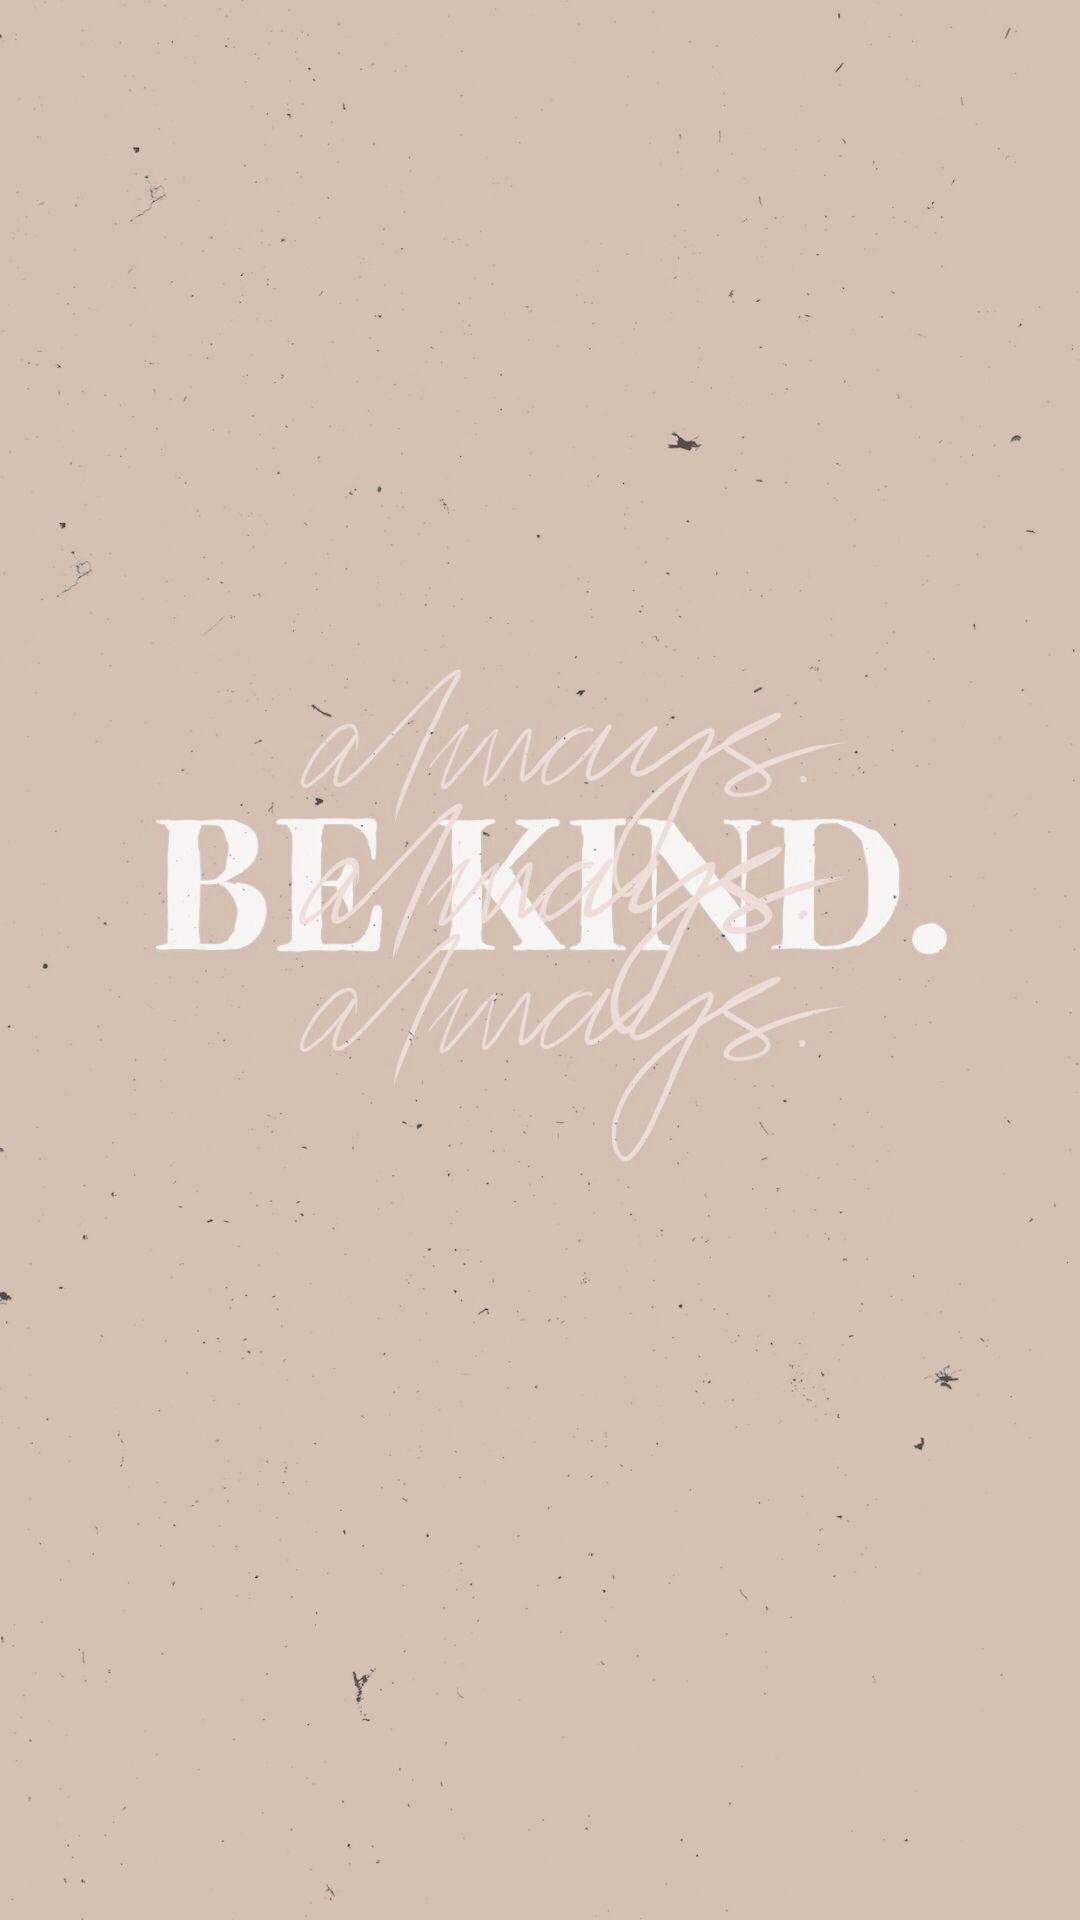 tavleenable. kindness ✨. Quote aesthetic, Pretty quotes, Inspirational quotes